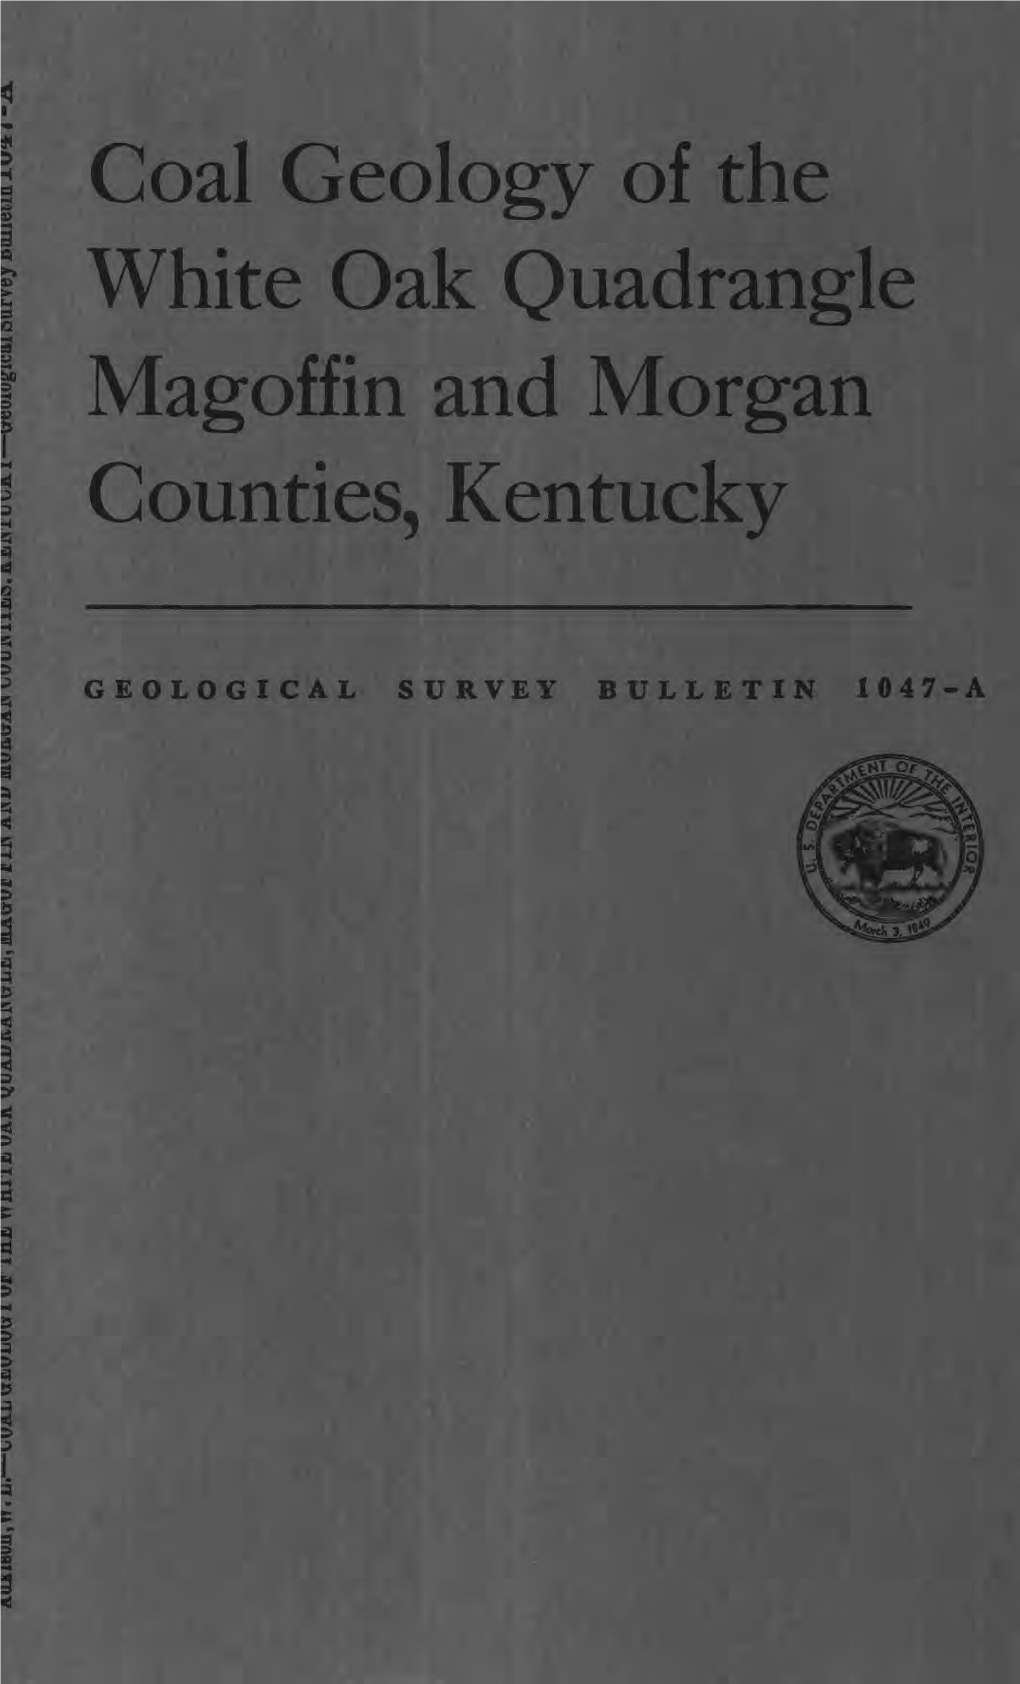 Coal Geology of the White Oak Quadrangle Magoffin and Morgan Counties, Kentucky